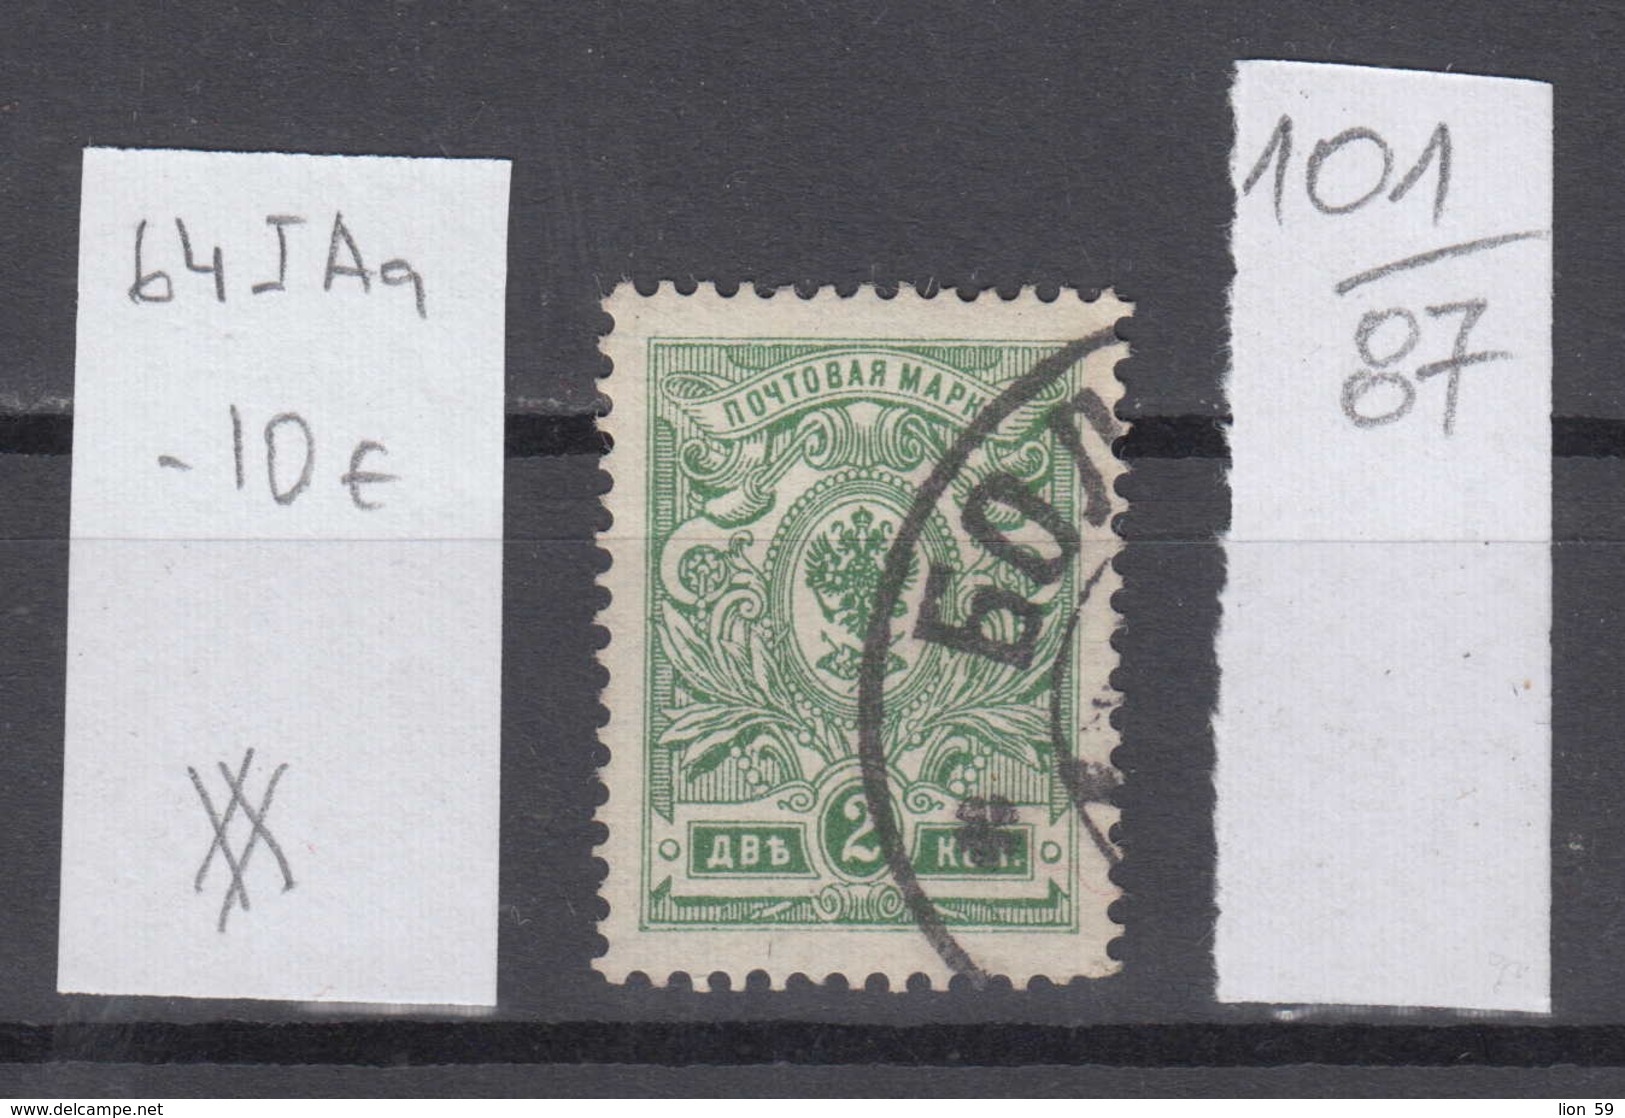 87K101 / 1908 - Michel Nr. 64 I A A - 2 K. , OWz , 14 1/4 : 14 3/4  Freimarken , Staatswappen ,used ( O ) Russia Russie - Usati